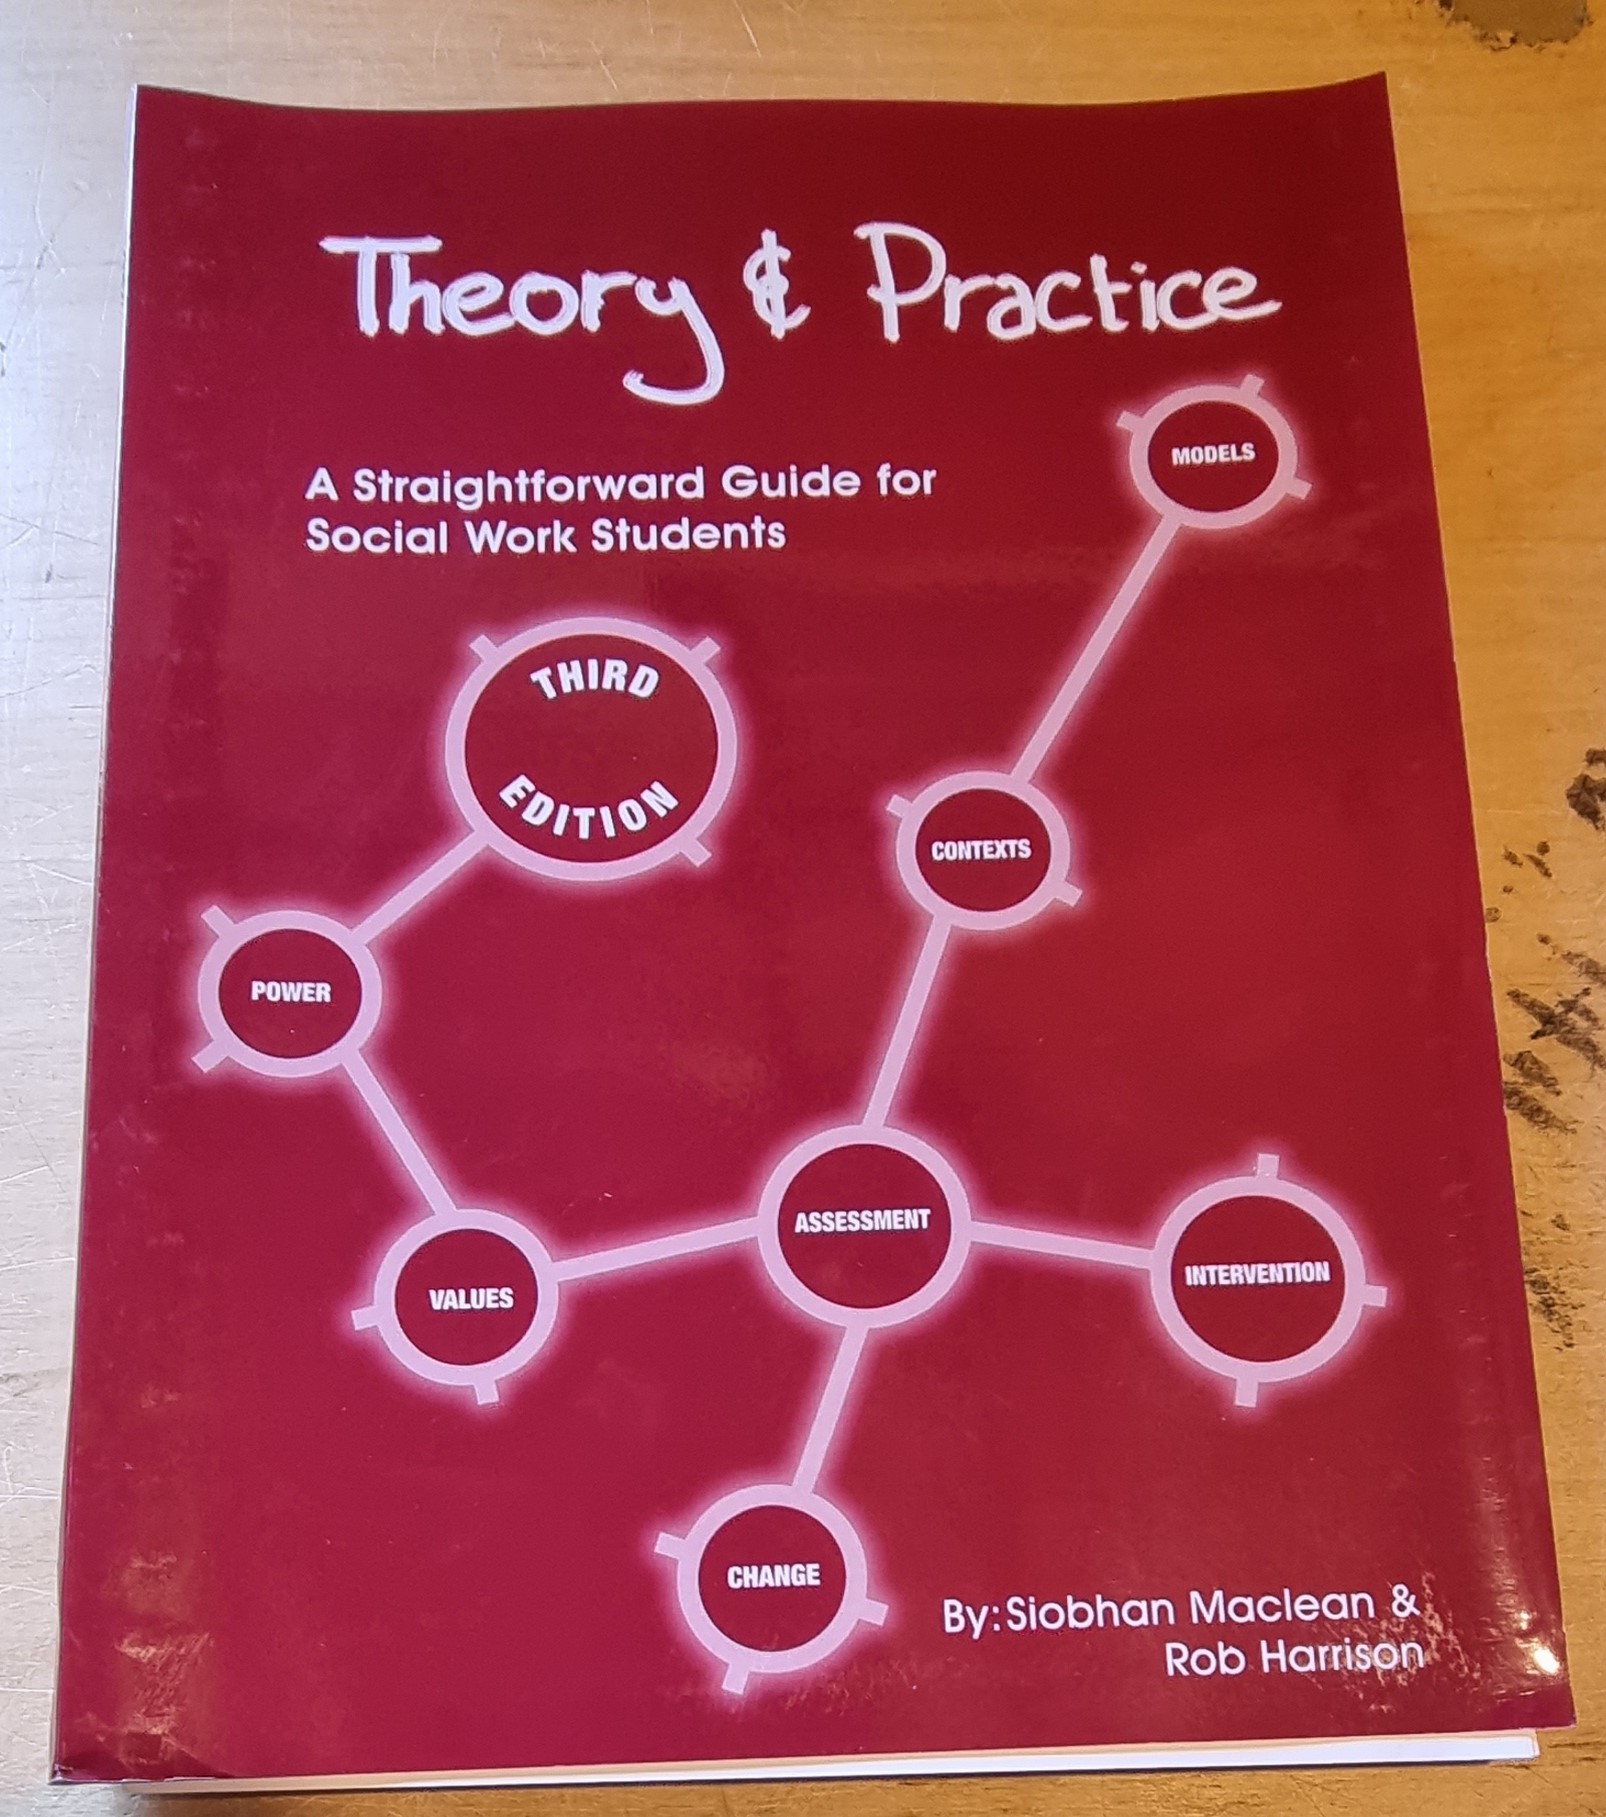 Theory and Practice: A Straightforward Guide for Social Work Students- dented corners - special offer